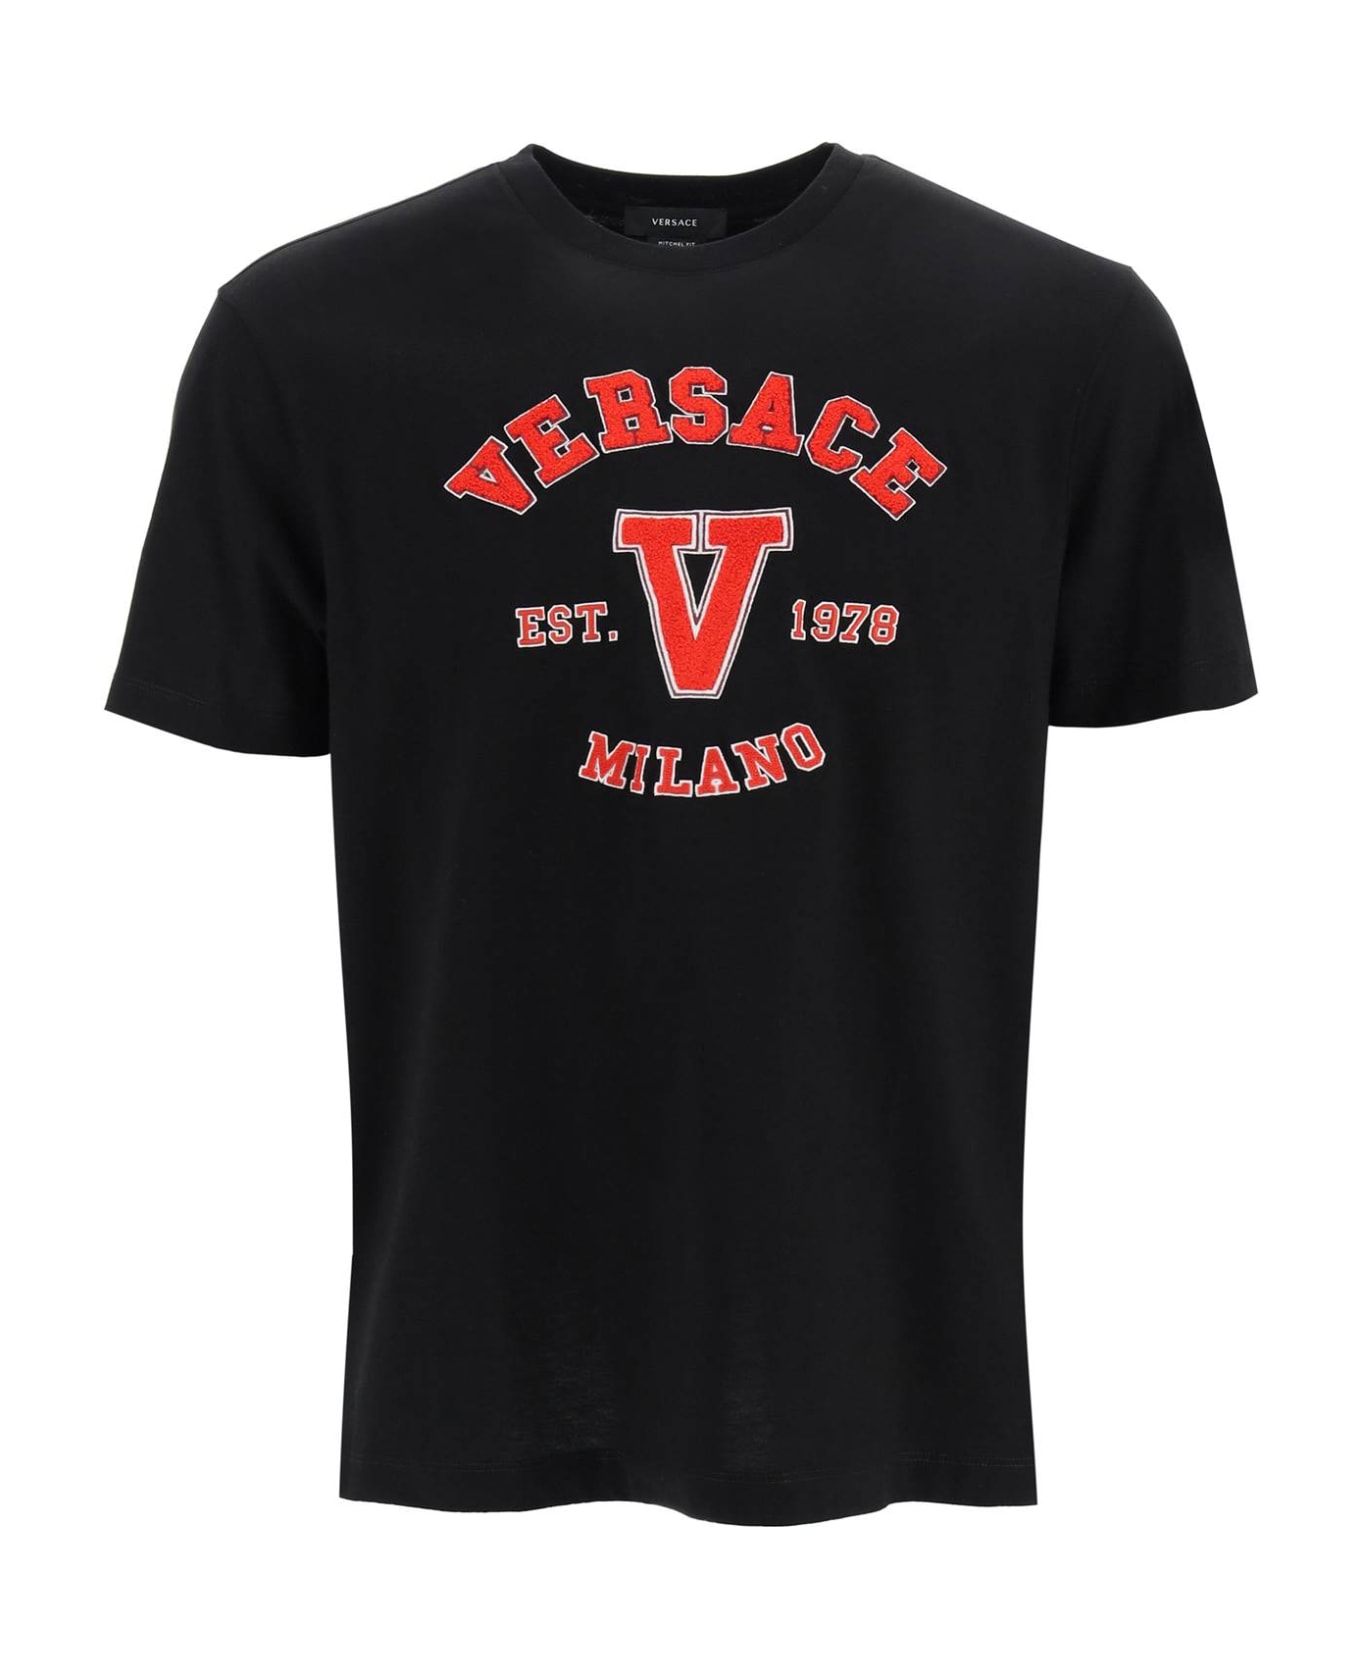 Versace Black T-shirt With Red Embroidered Sponge Logo - Nero